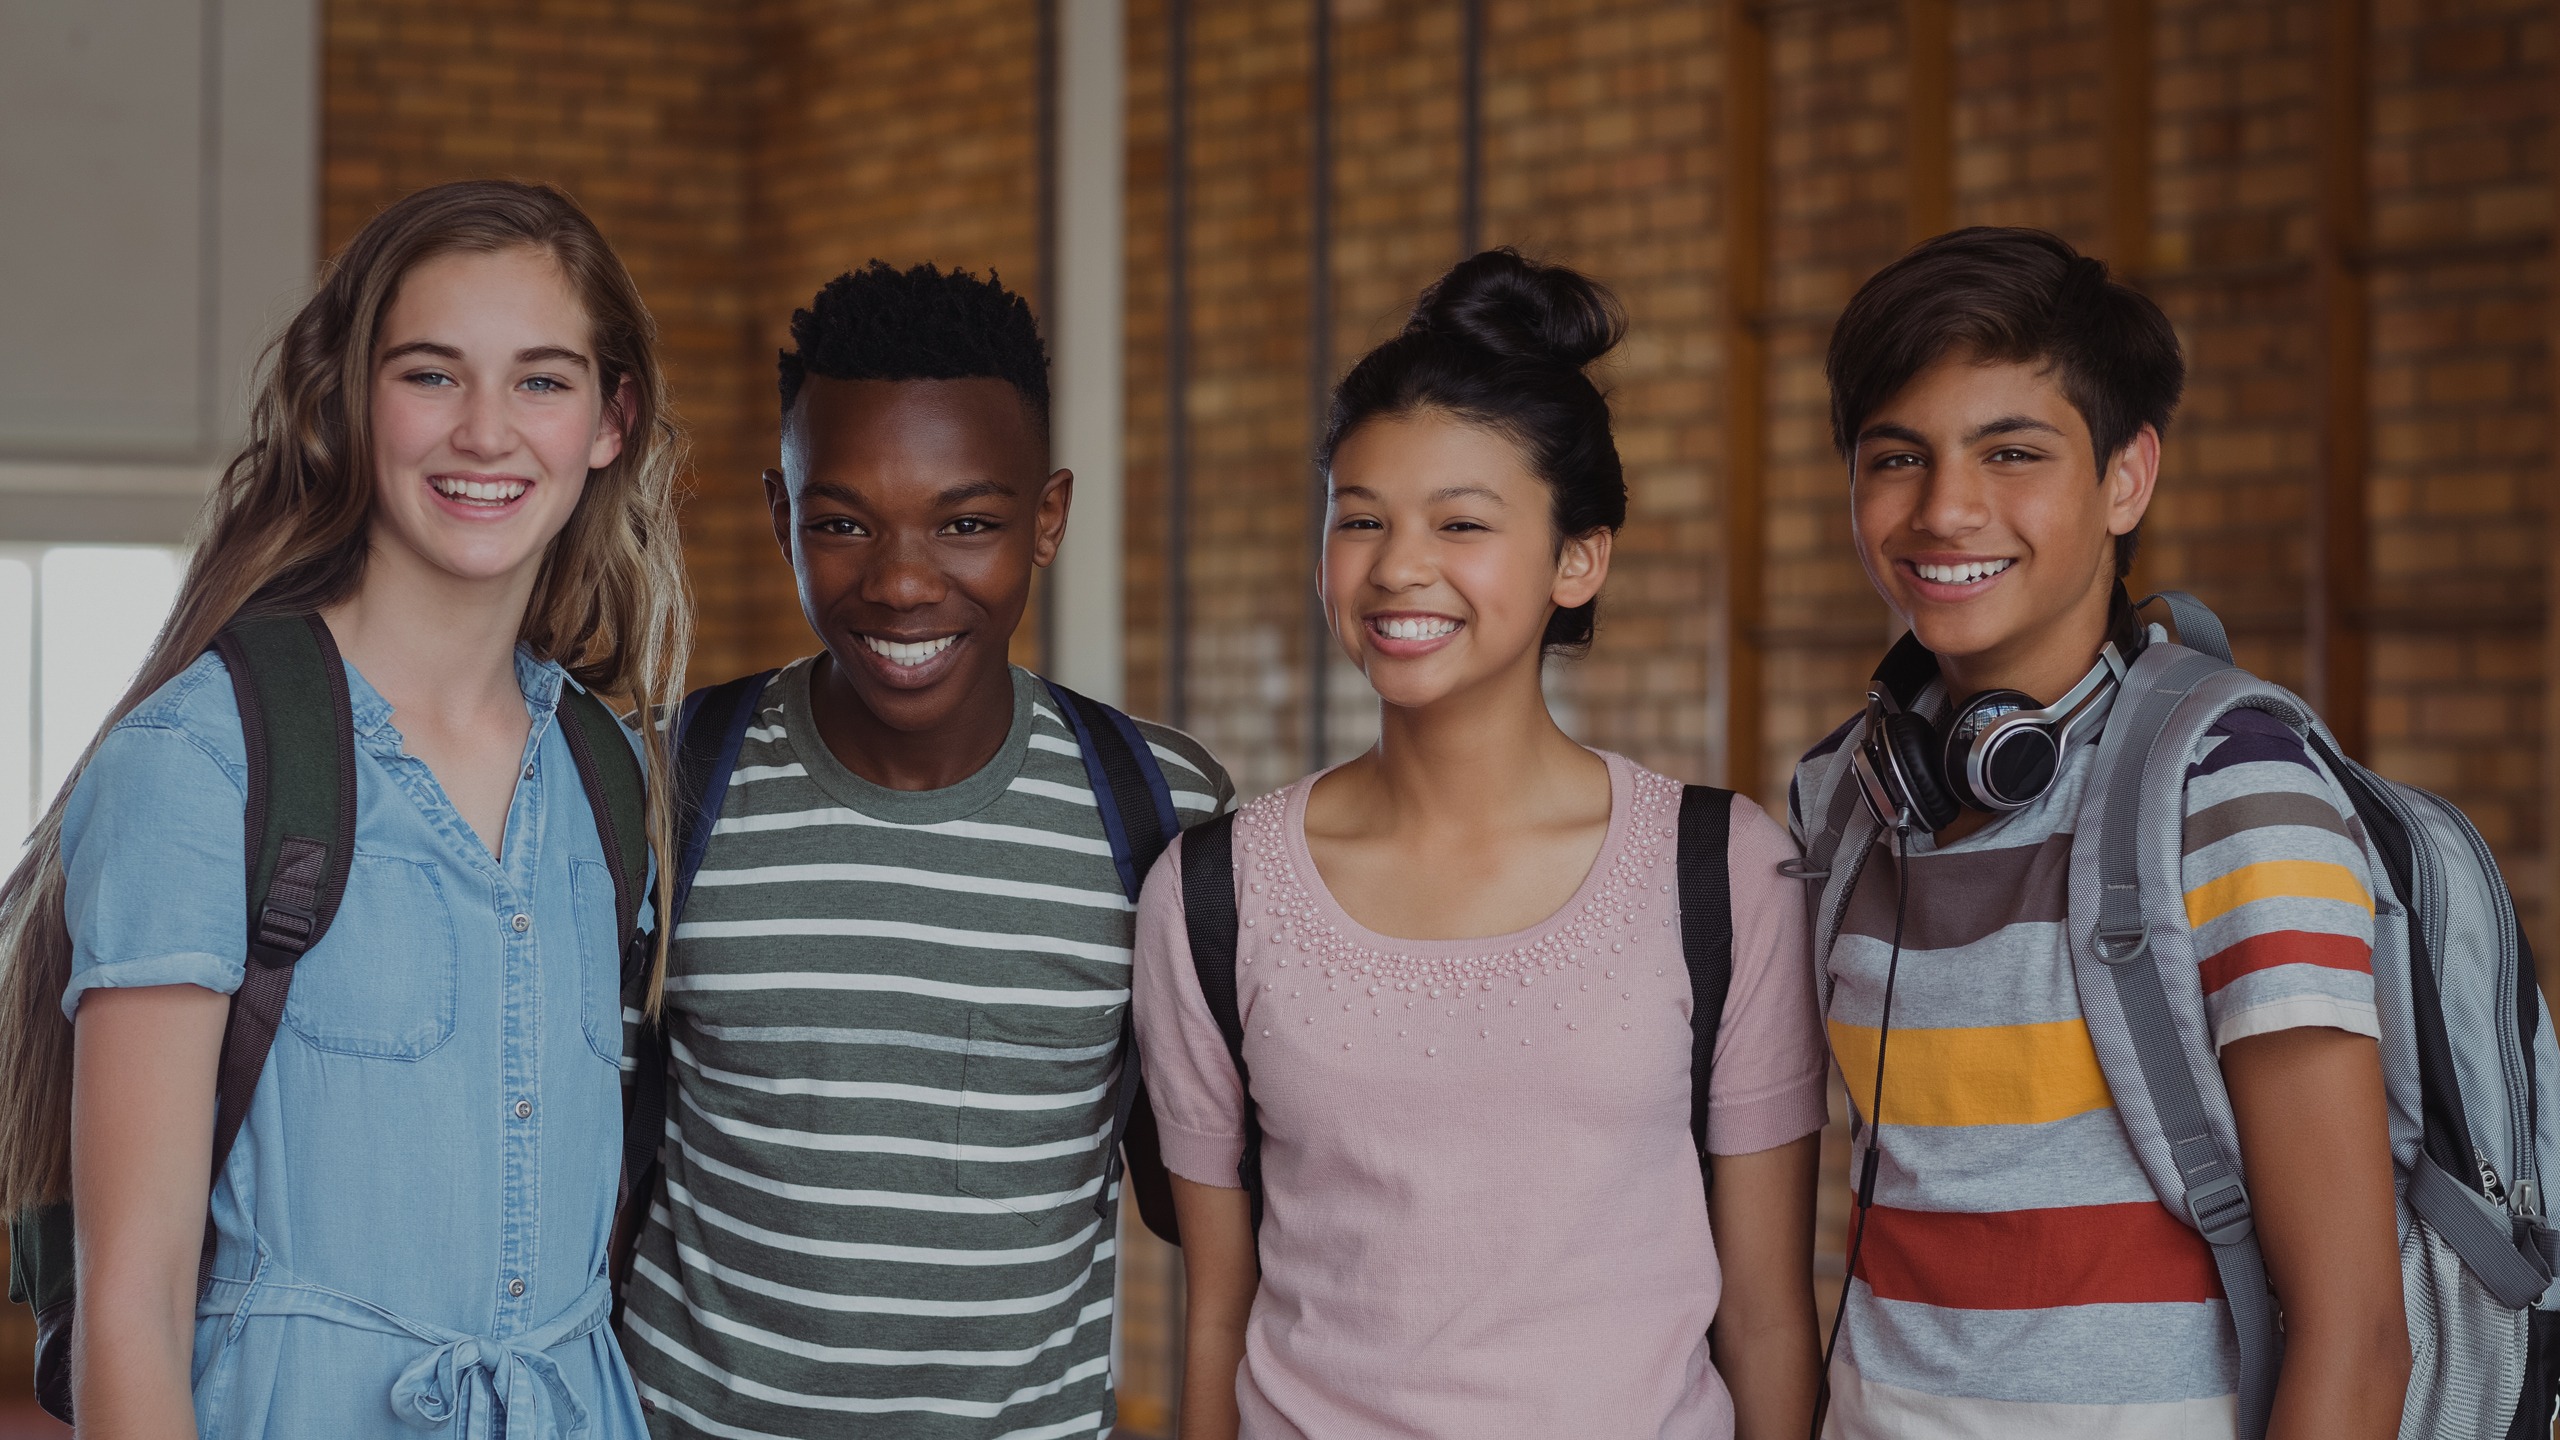 Four diverse high school students standing together